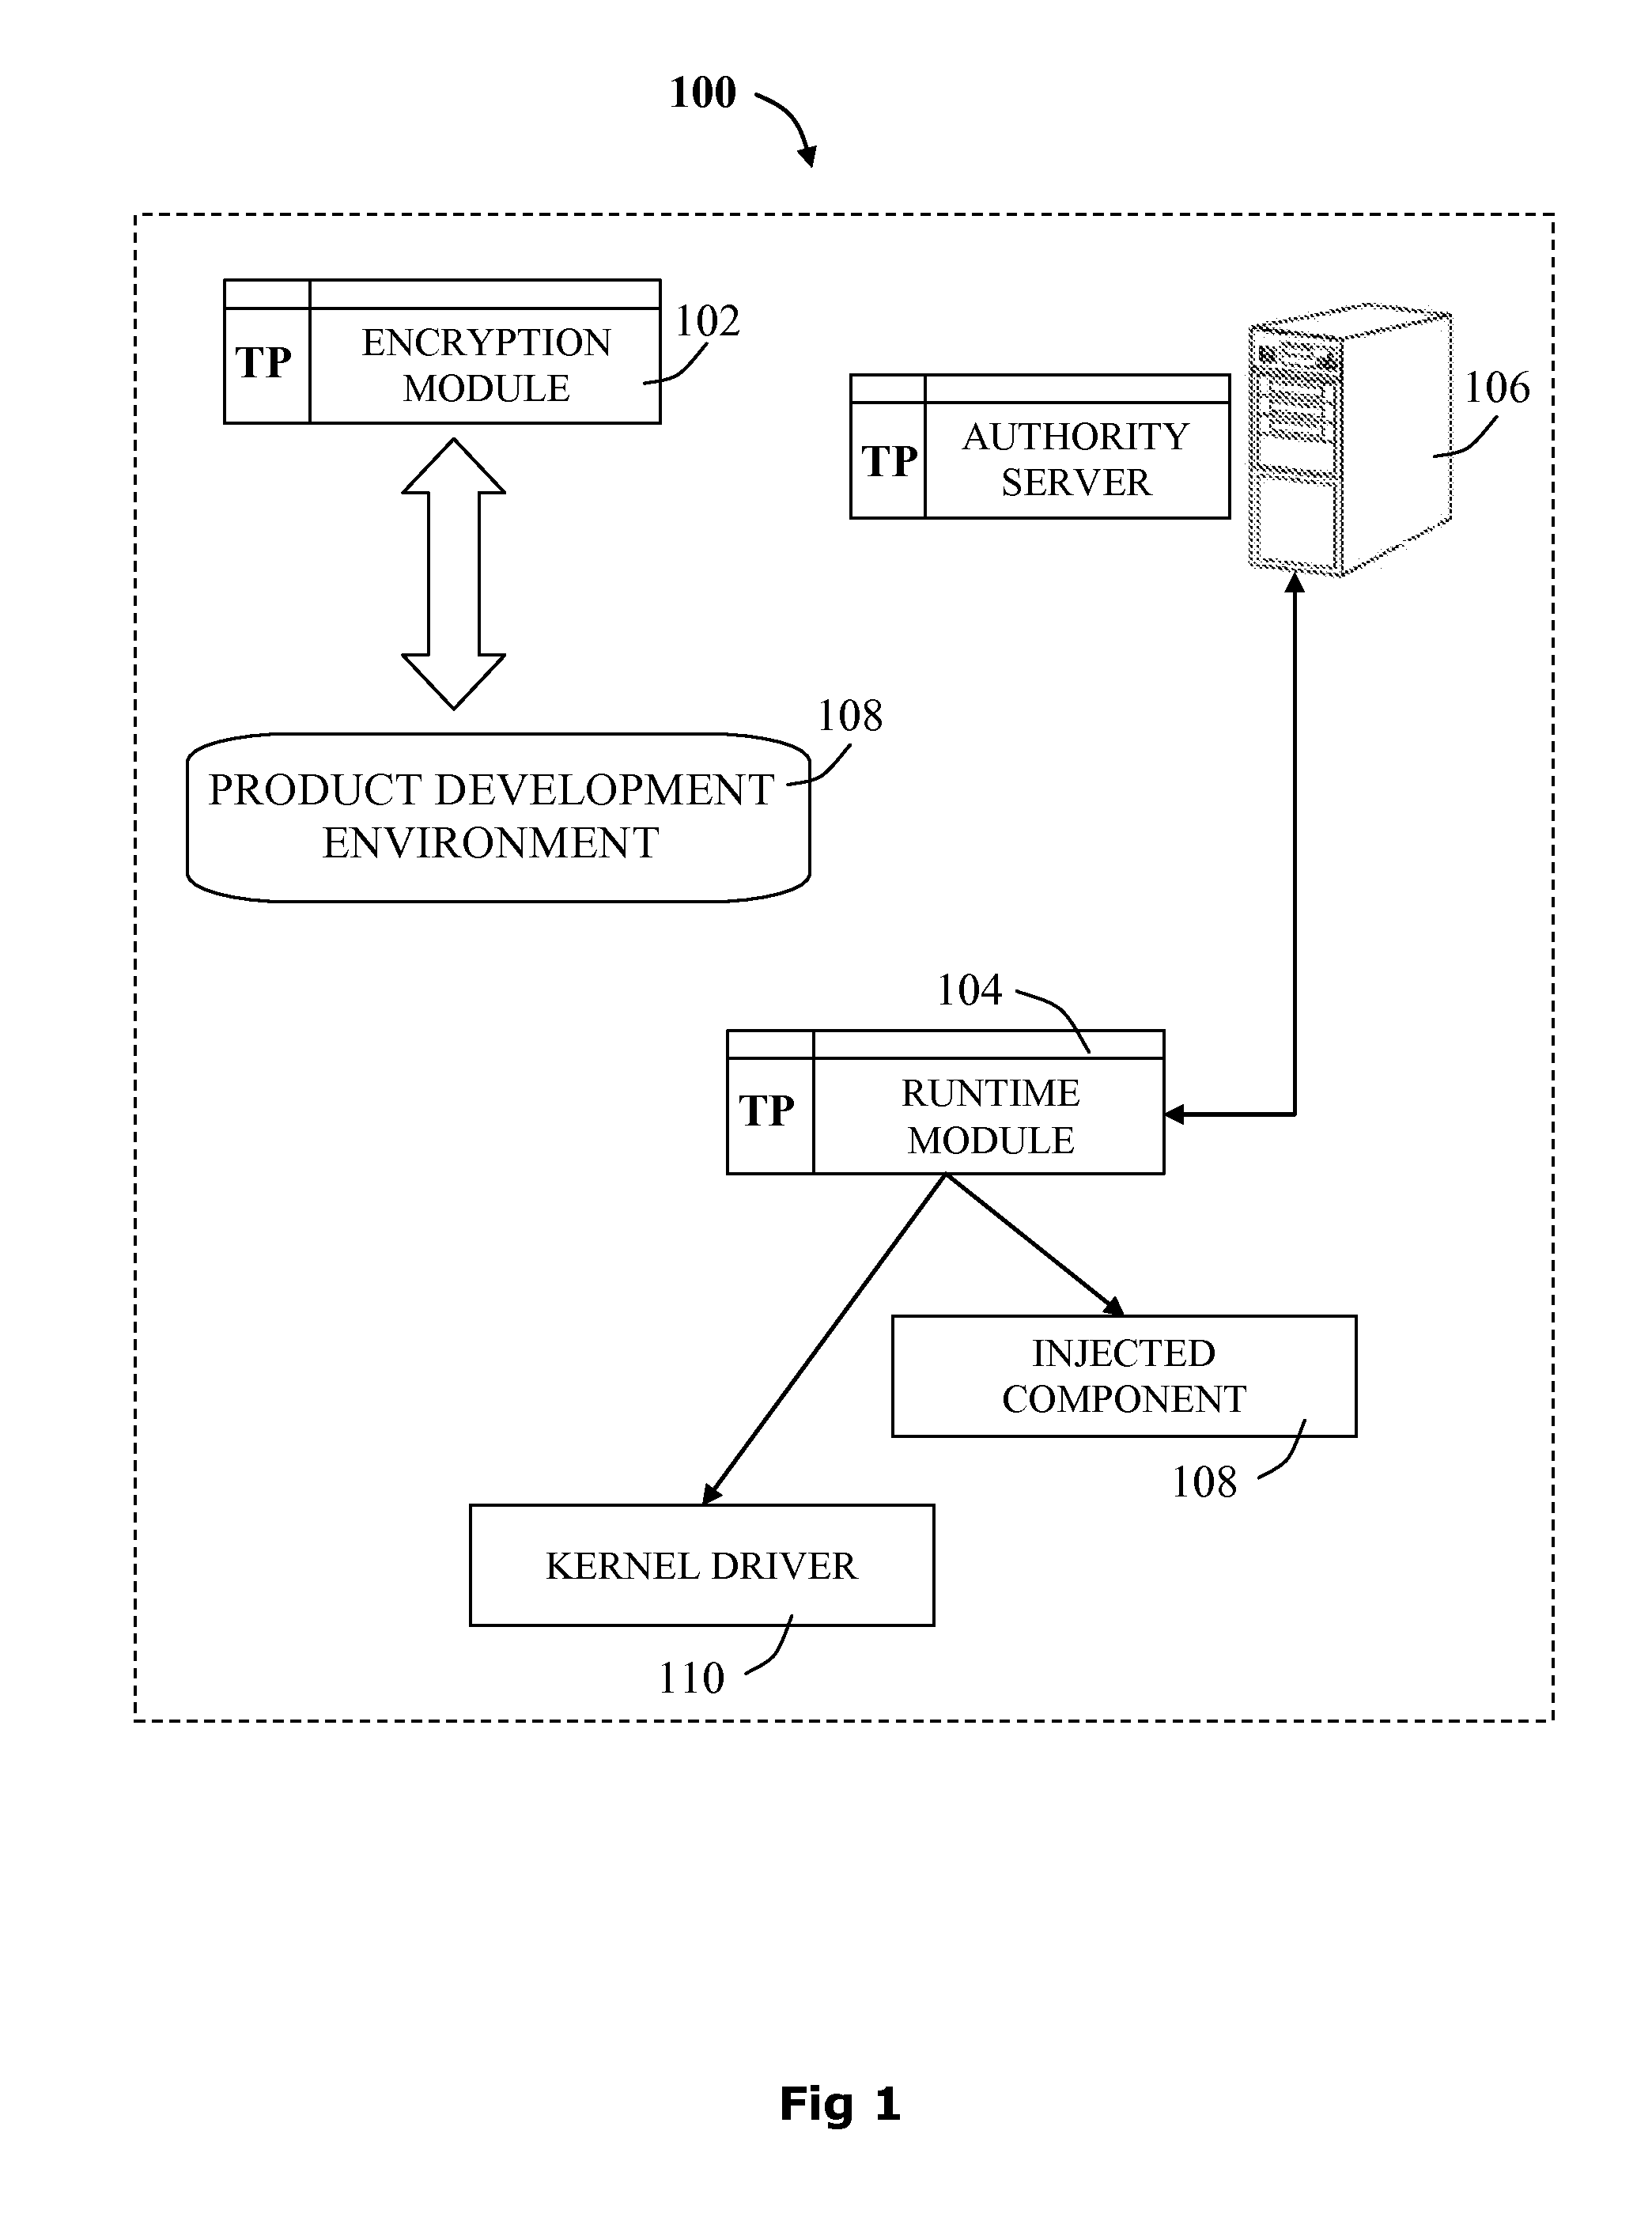 System and methods for CPU copy protection of a computing device